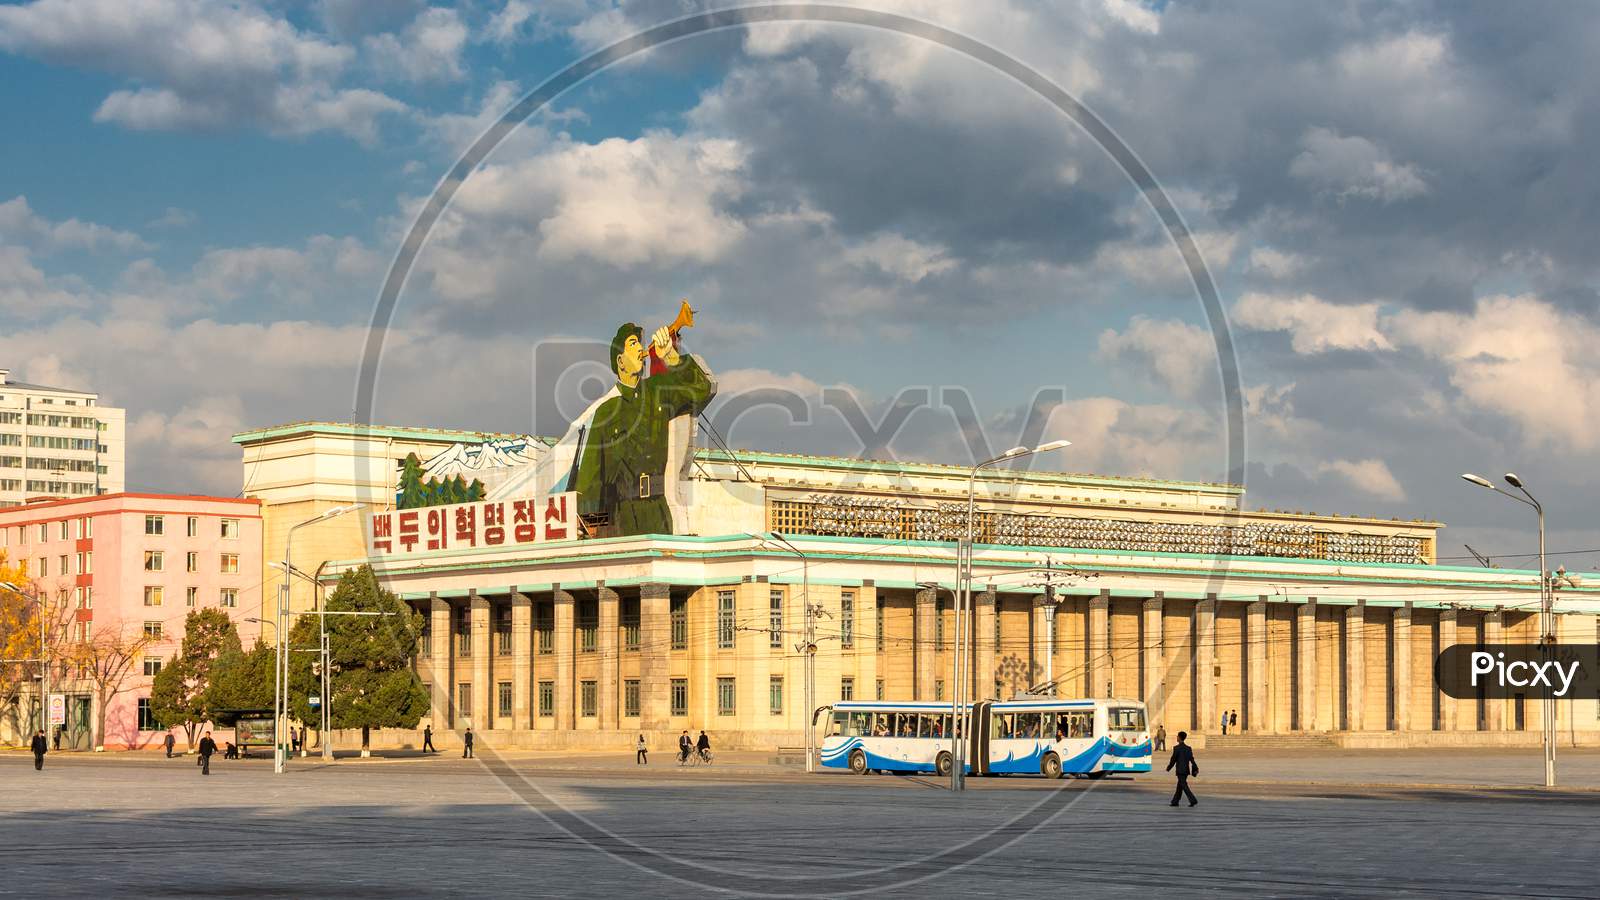 Kim Il-Sung Square And Government Buildings Decorated With Flags And Revolutionary Slogans In Pyongyang, North Korea